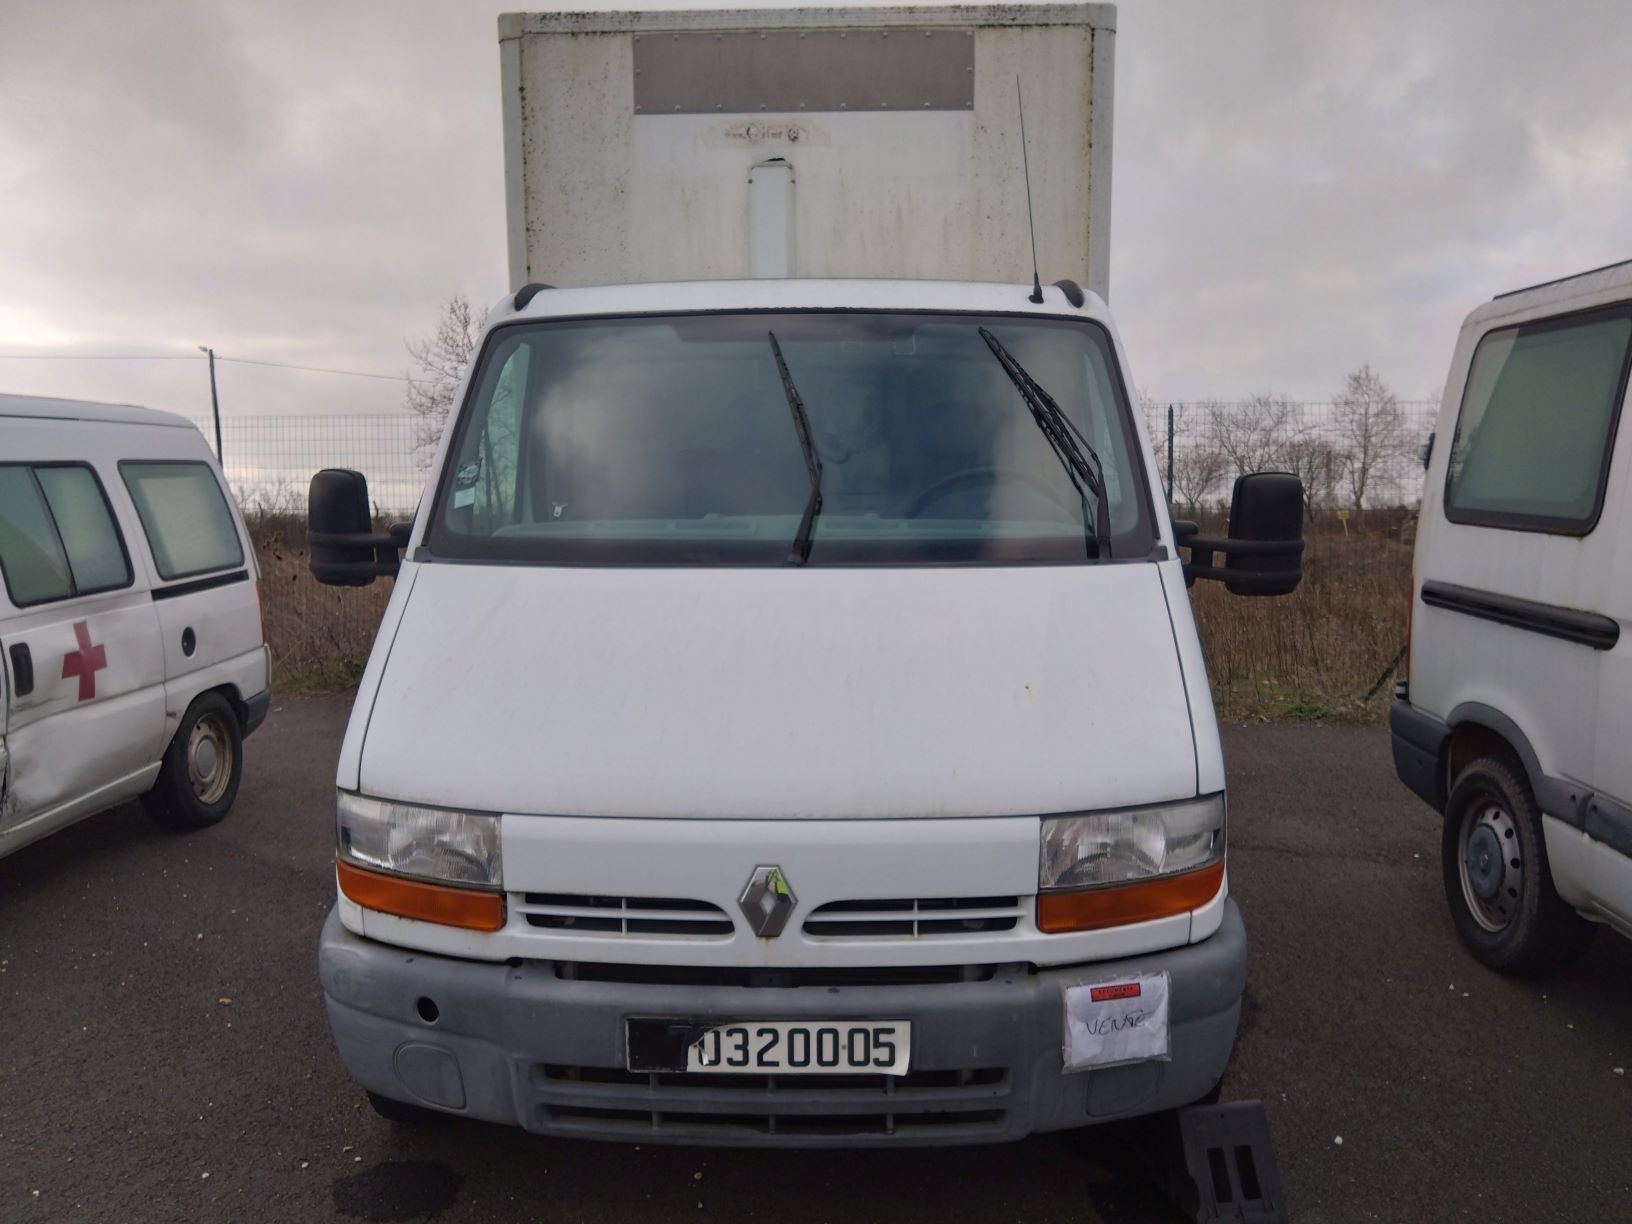 Null [RP][ACI] Reserved for automotive professionals.
RENAULT Master, 90.35CC, f&hellip;